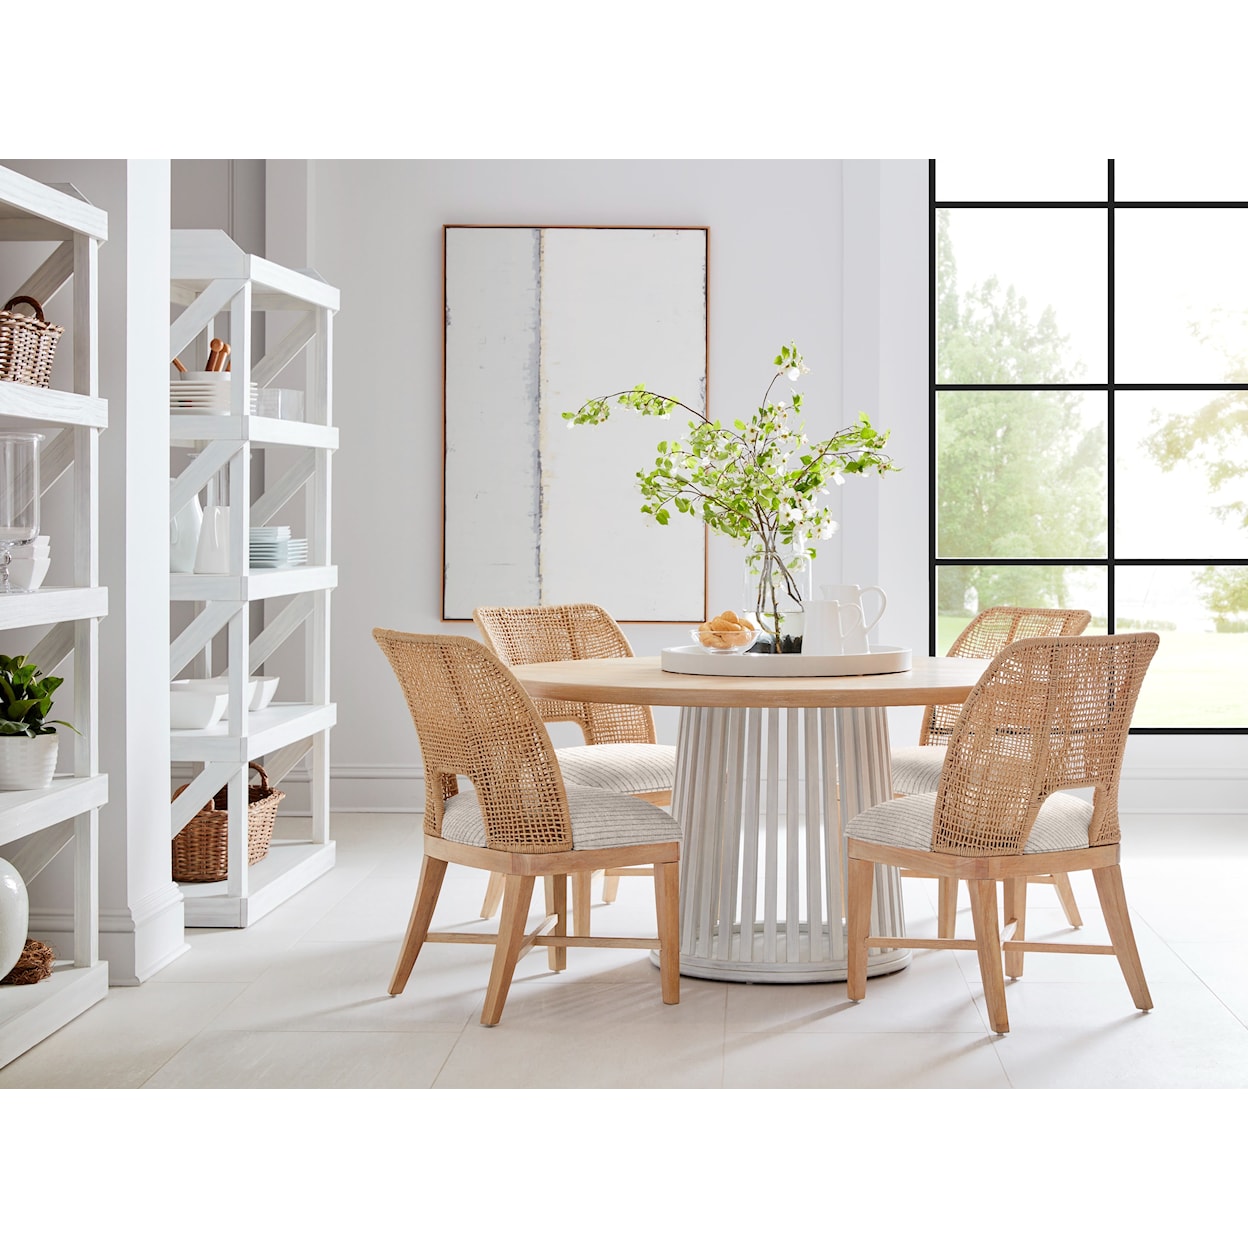 A.R.T. Furniture Inc Frame 7-Piece Dining Group